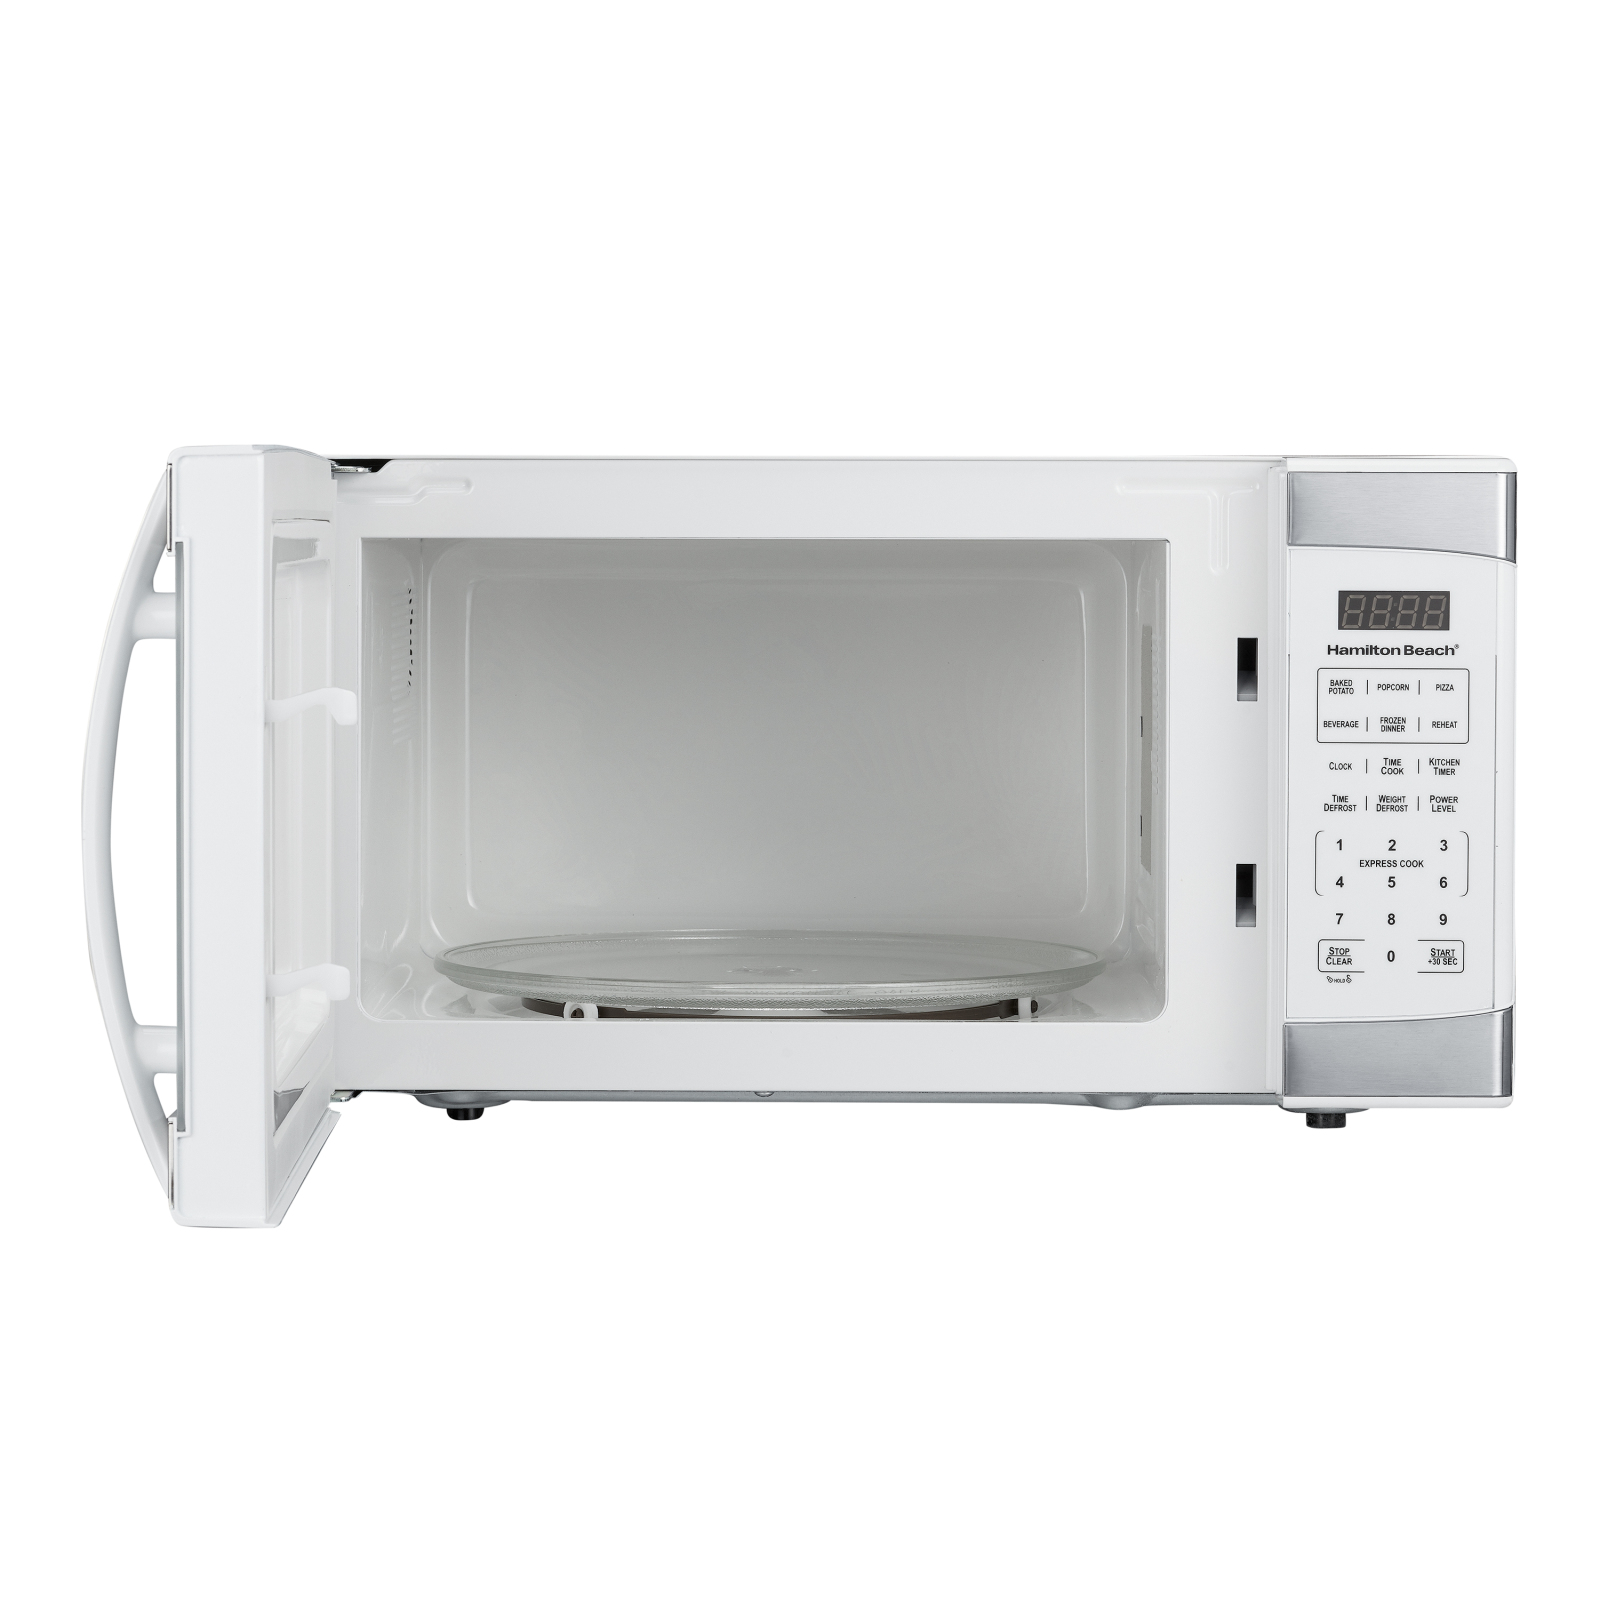 Hamilton Beach 1.1 Cu.ft White with Stainless Steel Digital Microwave Oven - image 5 of 5